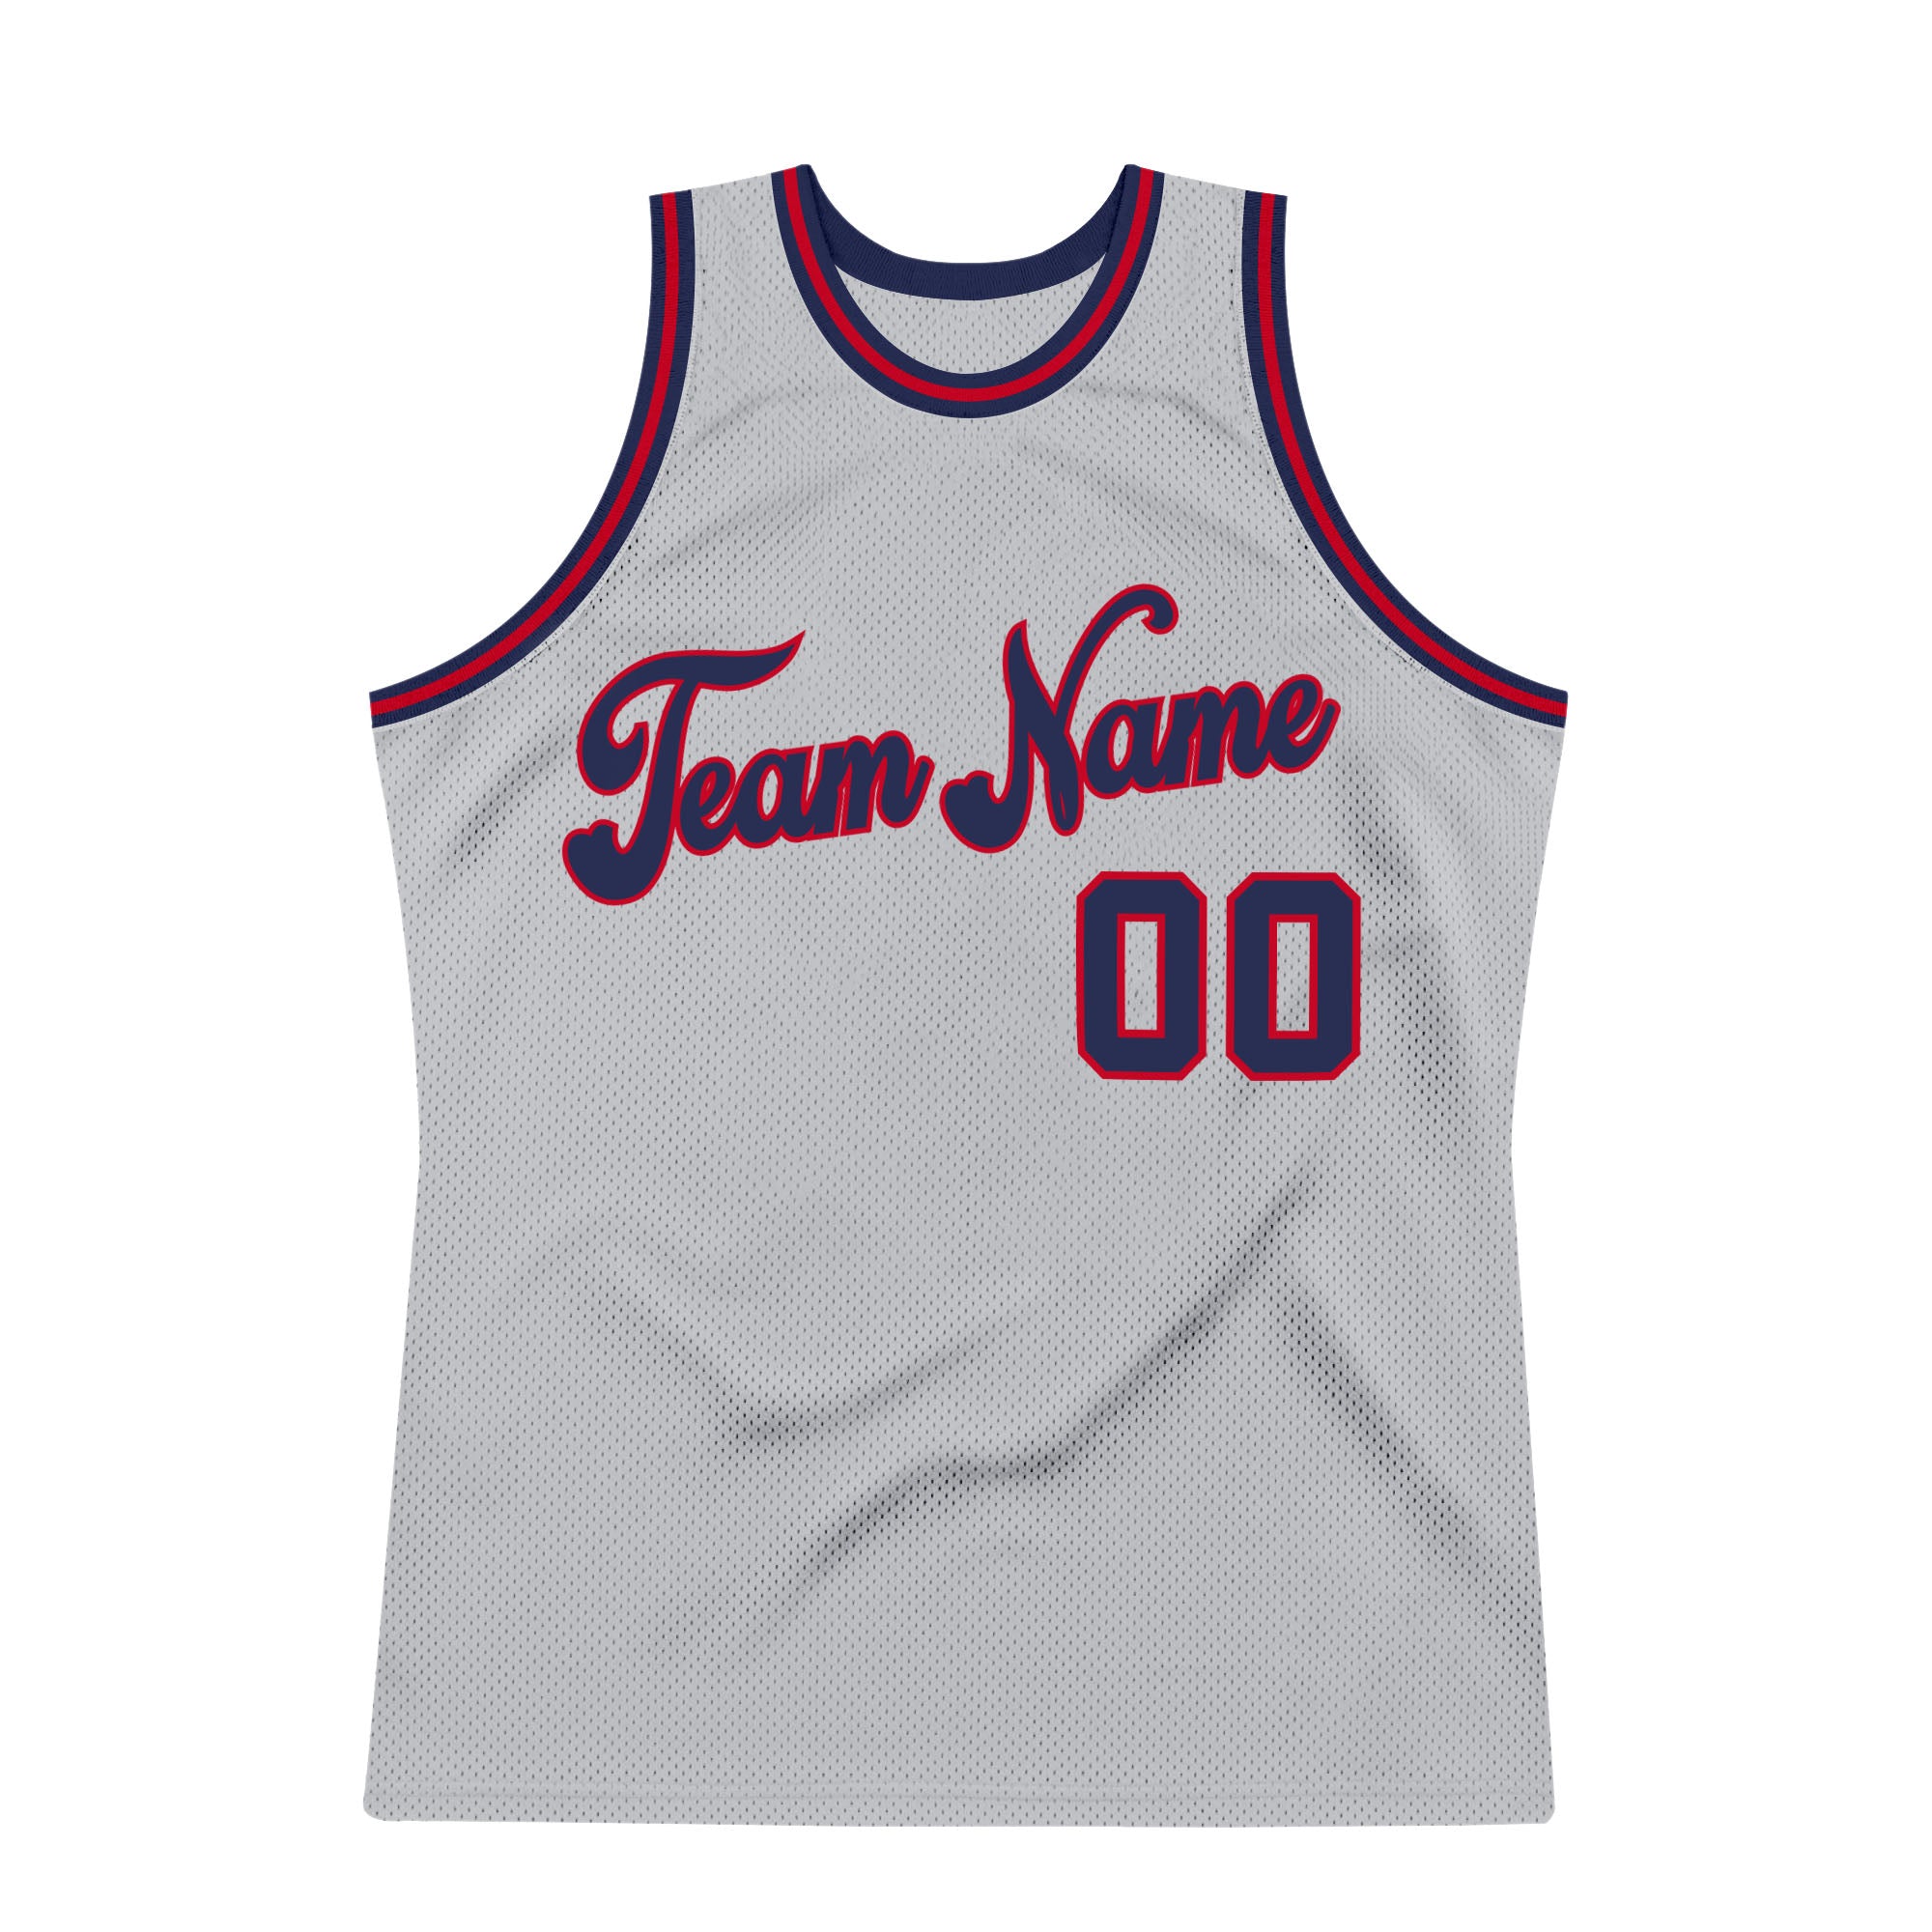 FANSIDEA Custom Silver Gray Navy-Red Authentic Throwback Basketball Jersey Men's Size:2XL